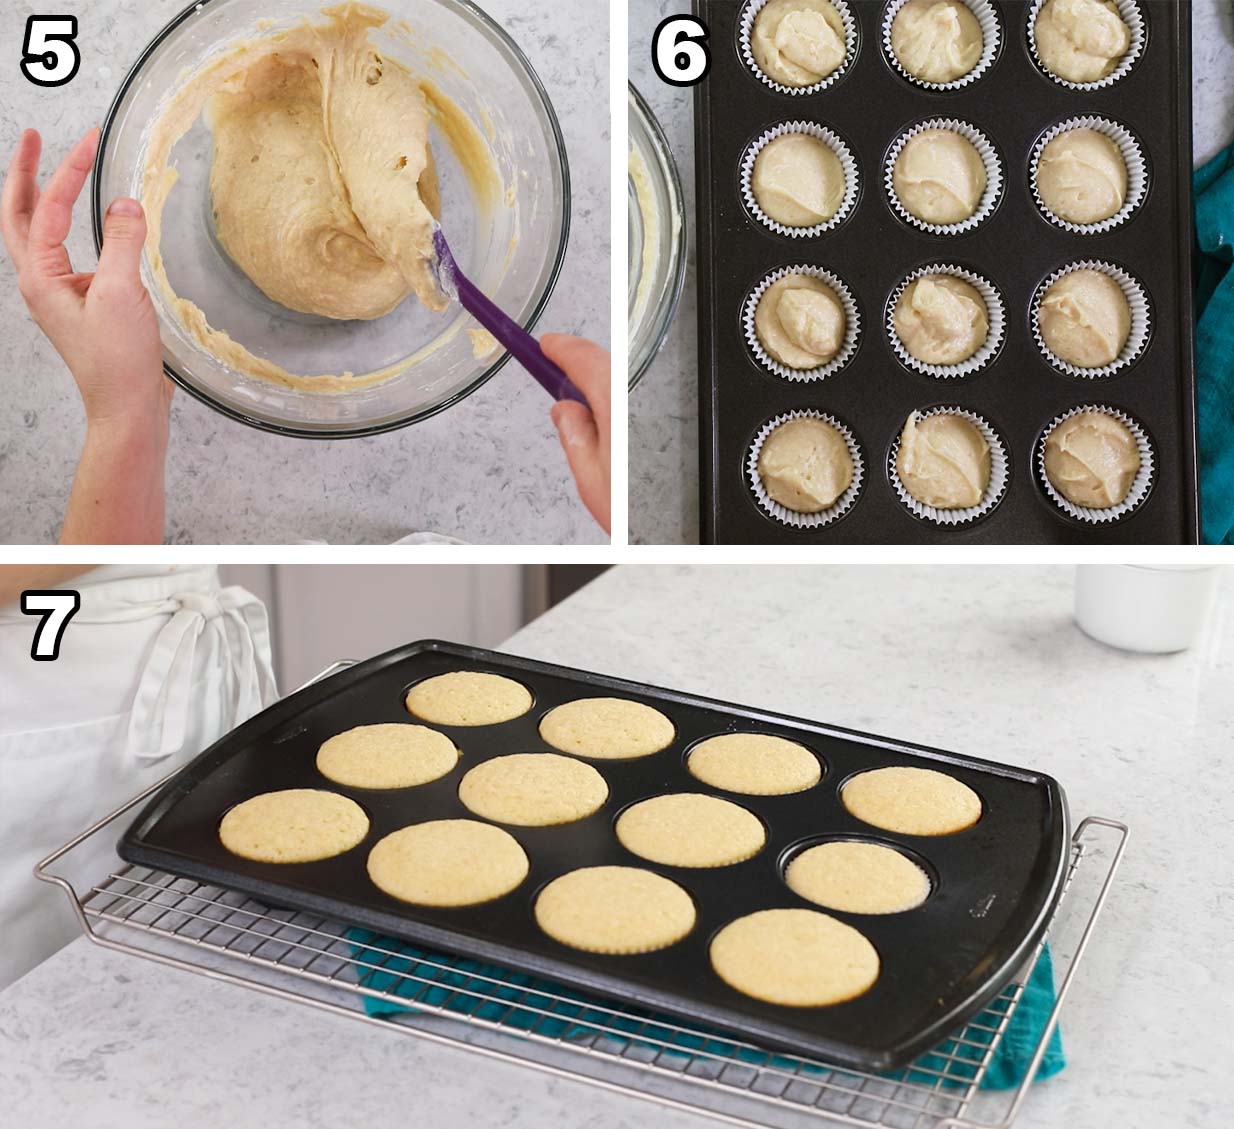 Three photos showing batter being stirred, portioned into muffin liners, and baked.